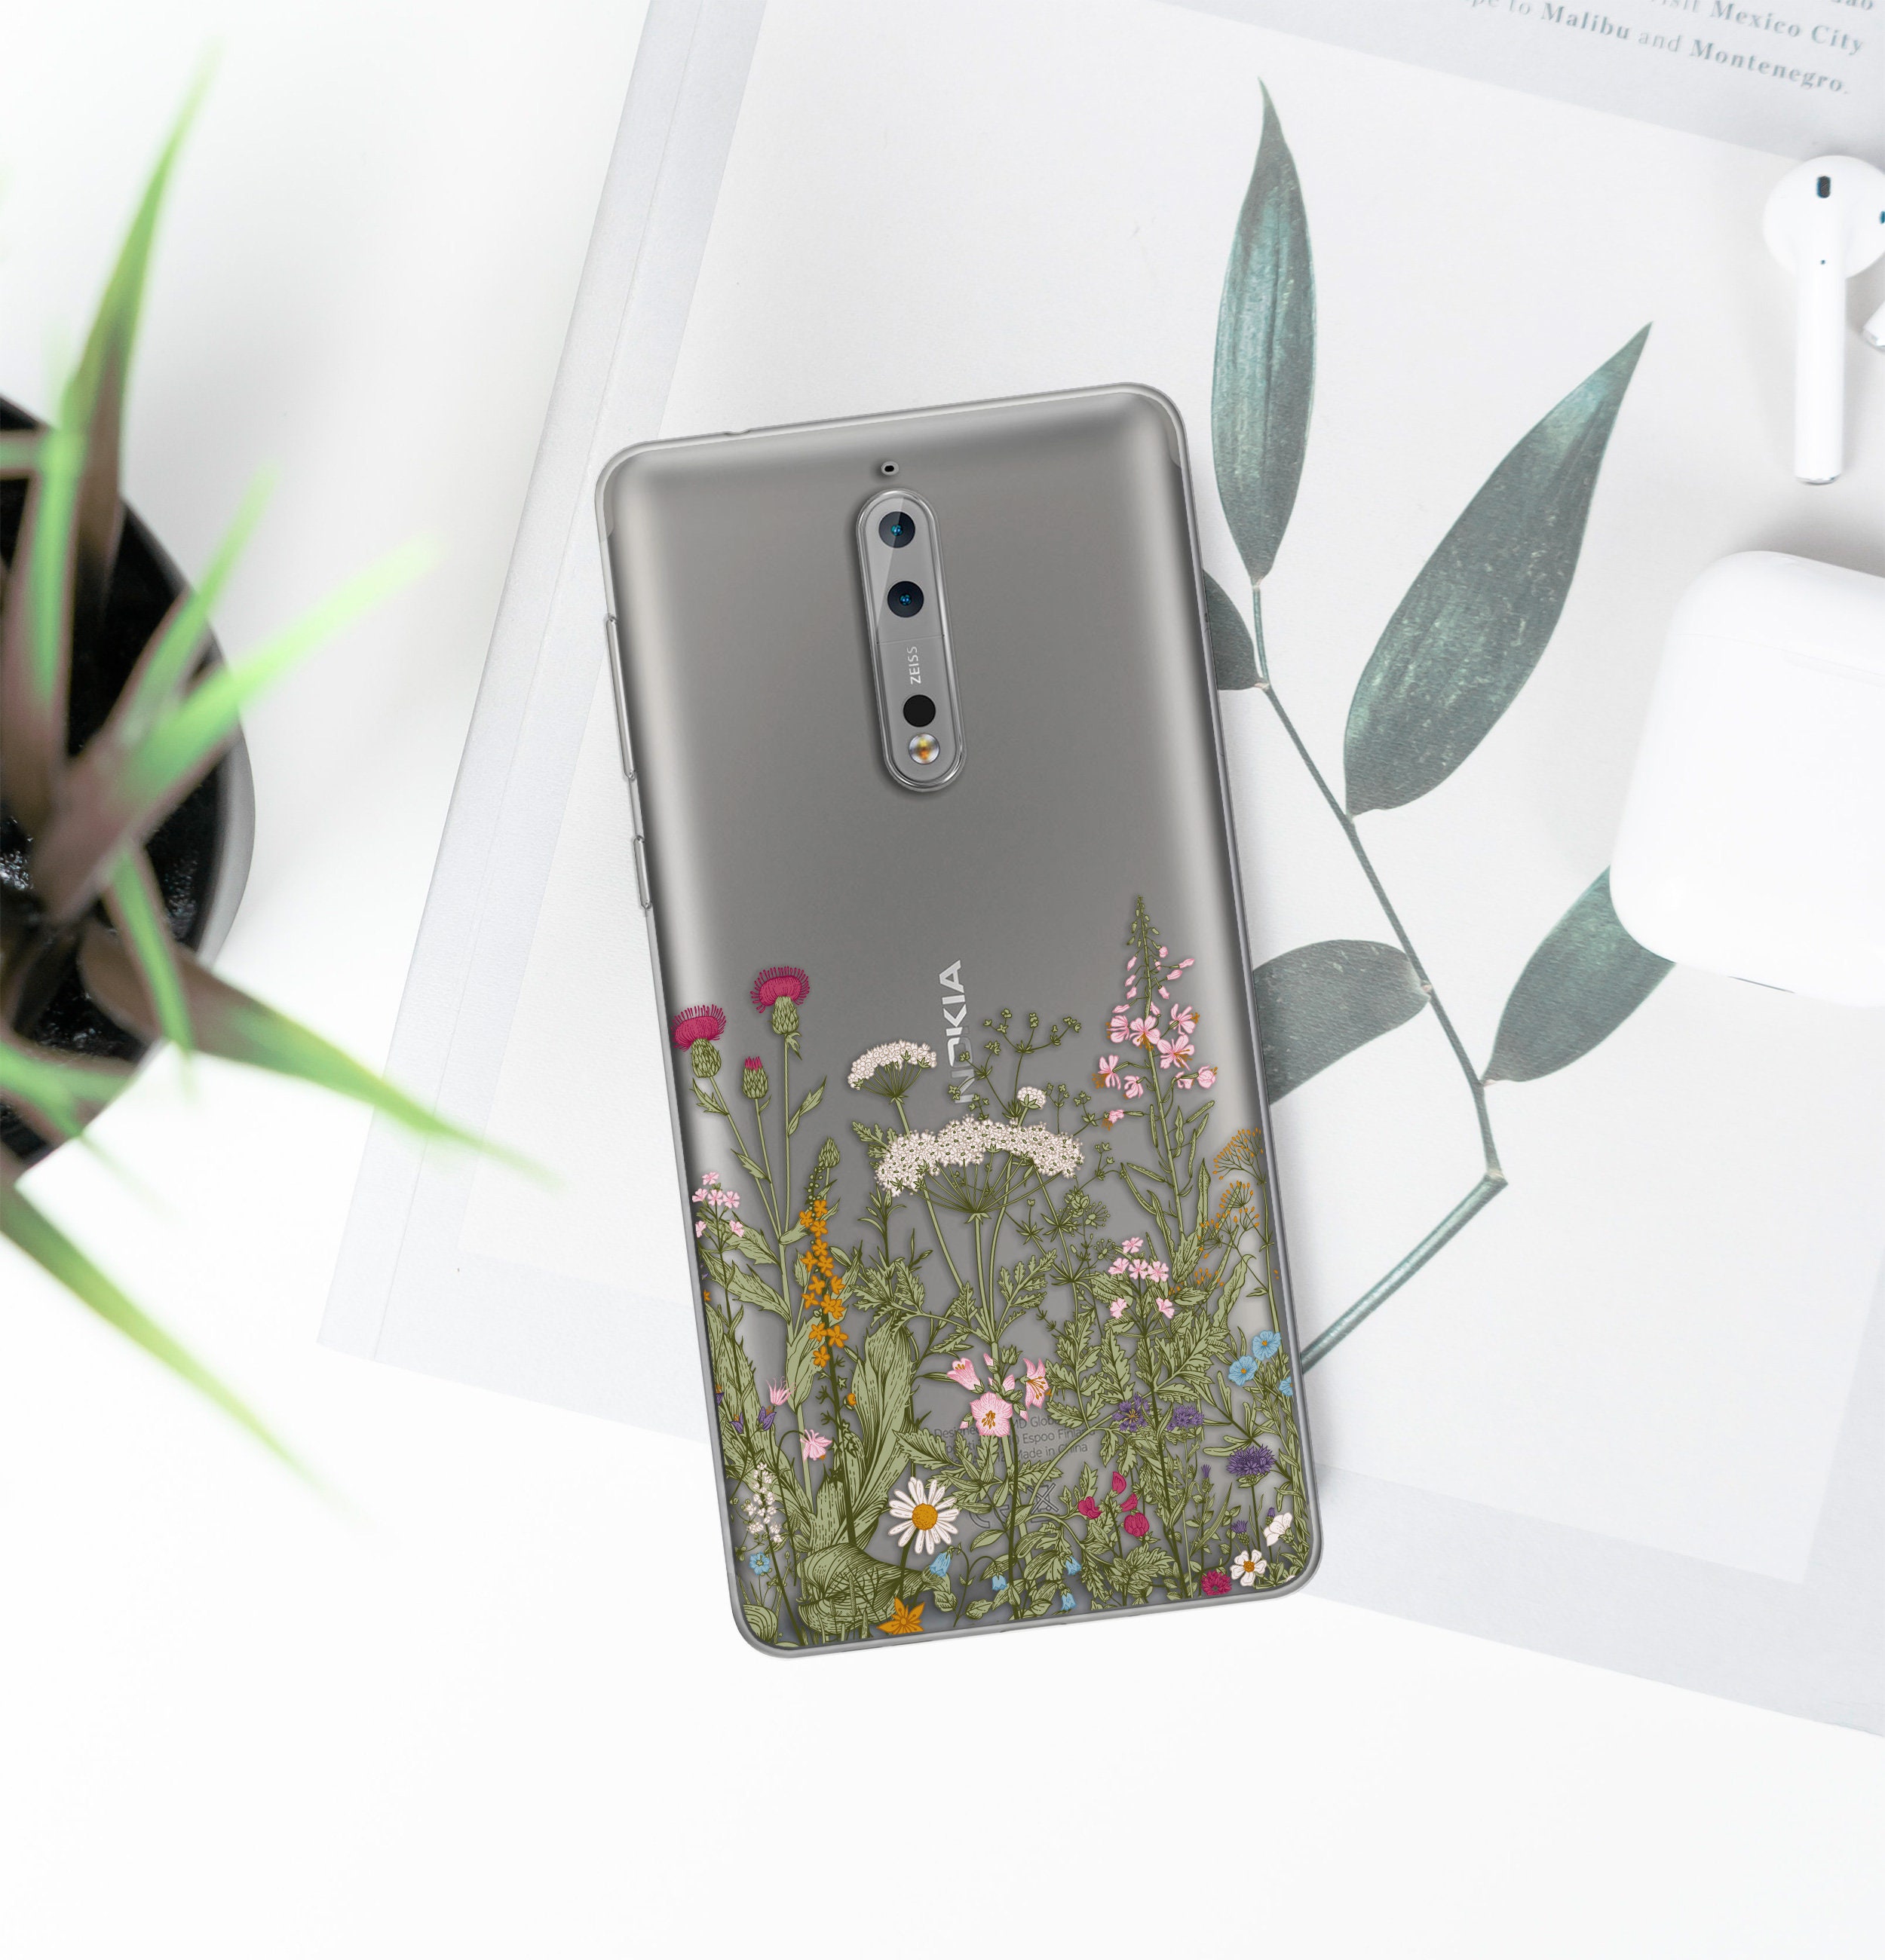 Koning Lear Weerkaatsing broeden Wildflowers Sony Xperia Case Xperia Z5 Compact Herbs Xperia - Etsy